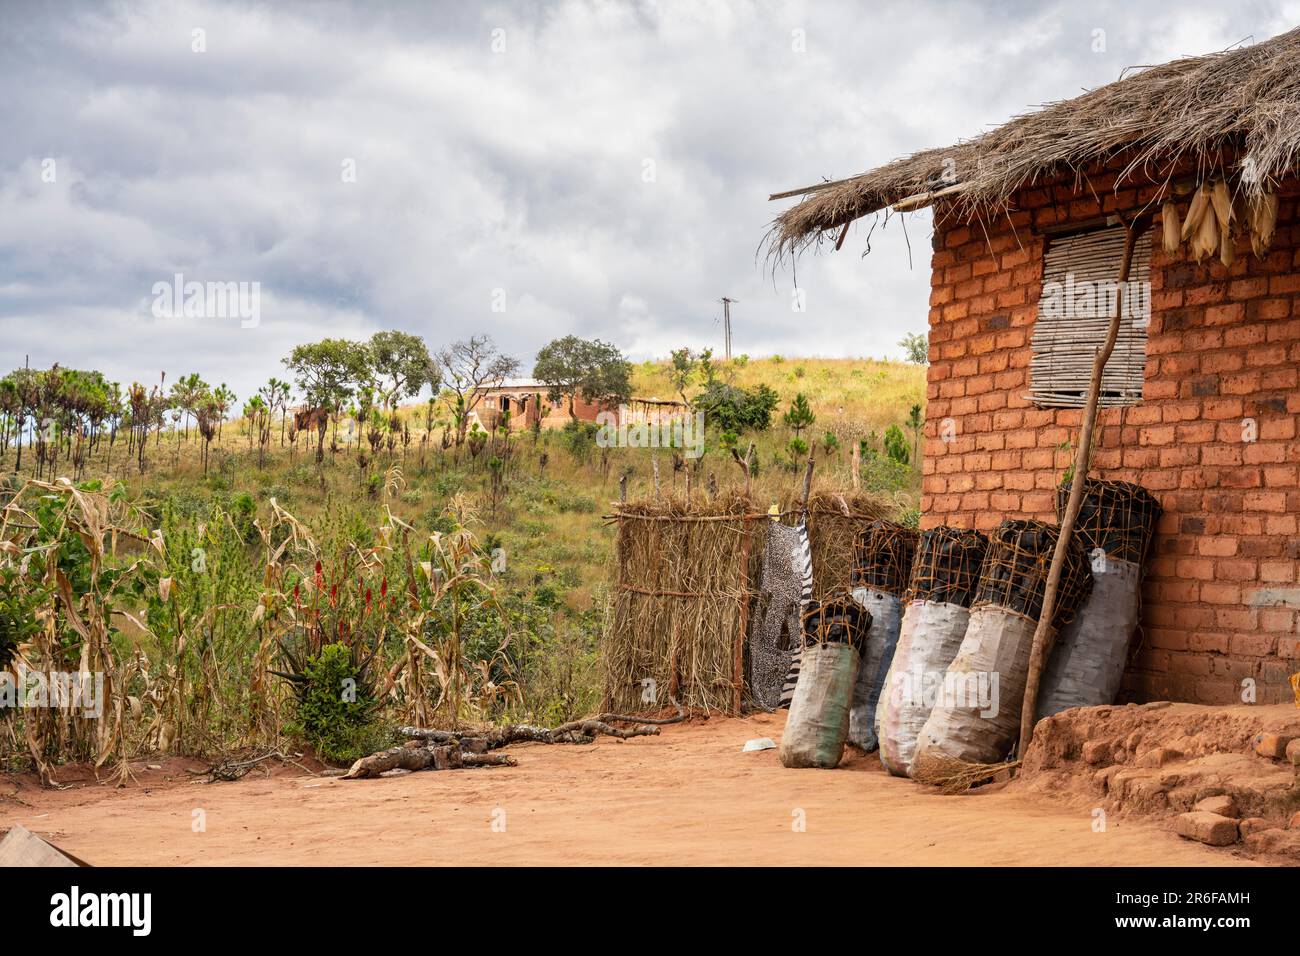 Several sacks of illegally produced charcoal are stacked against a house in rural Malawi. Stock Photo